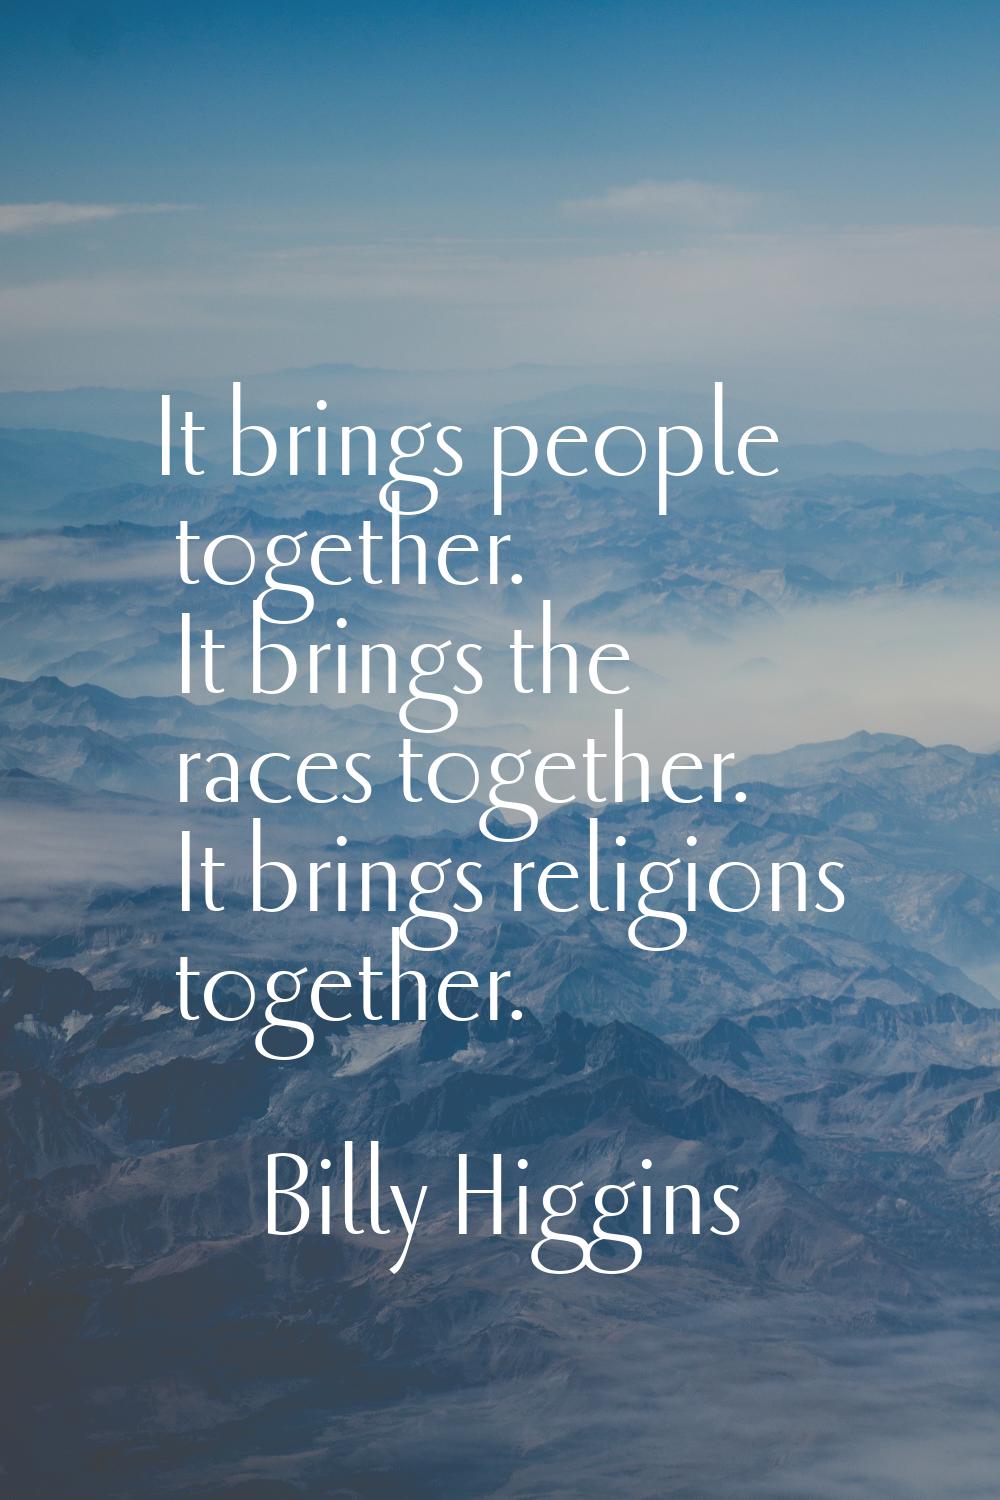 It brings people together. It brings the races together. It brings religions together.